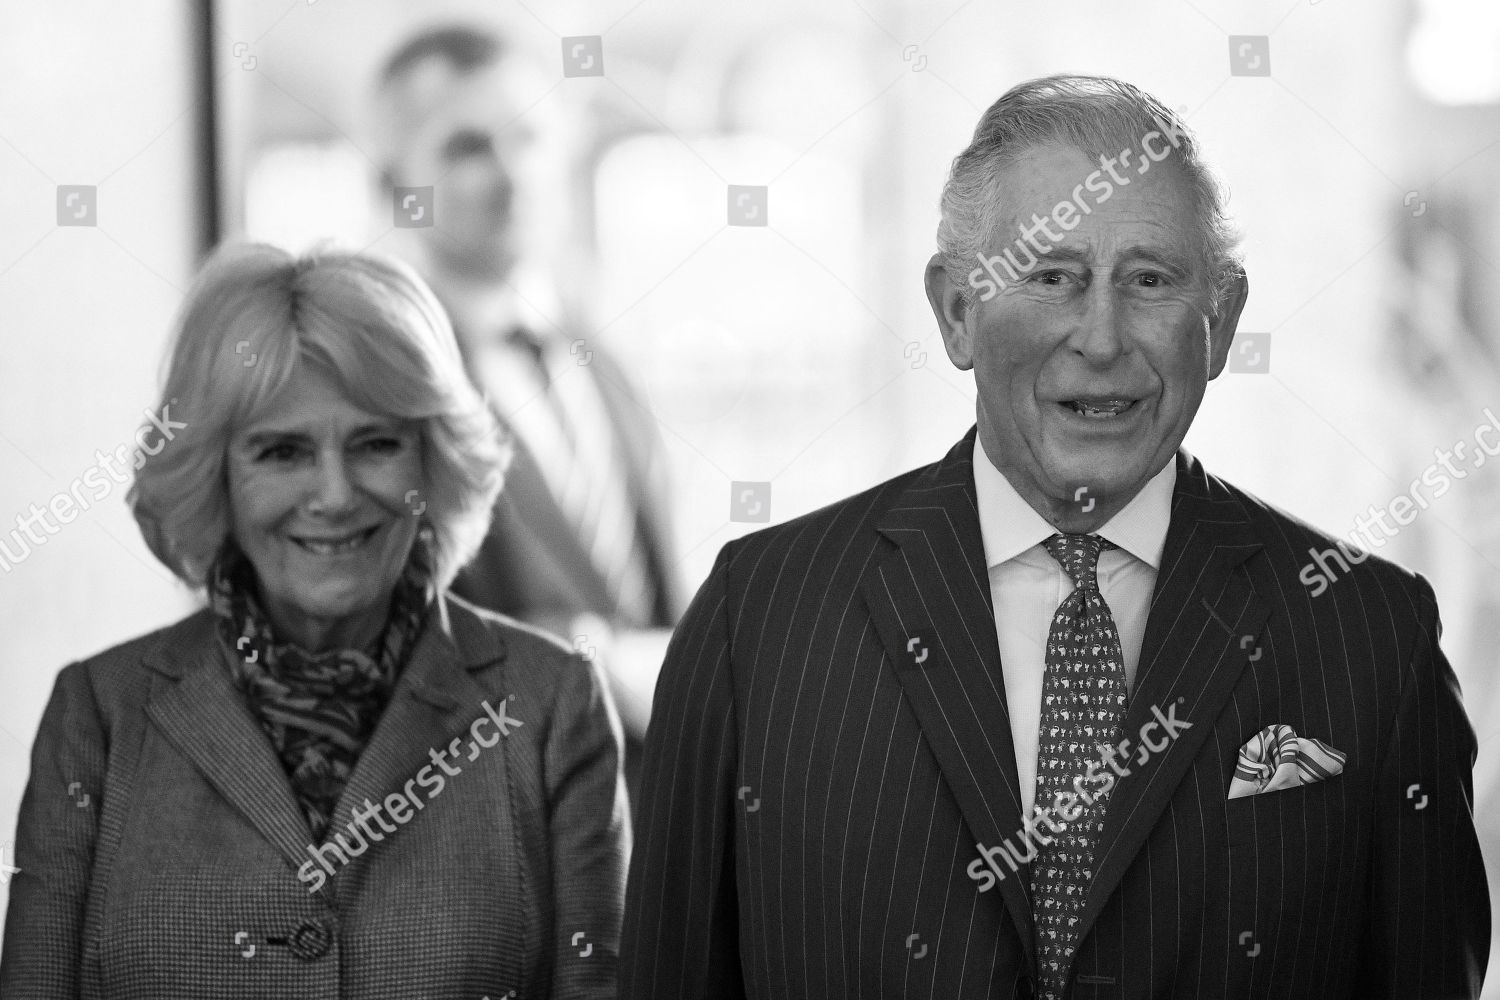 prince-charles-and-camilla-duchess-of-cornwall-visit-to-the-supreme-court-london-uk-shutterstock-editorial-10088612p.jpg